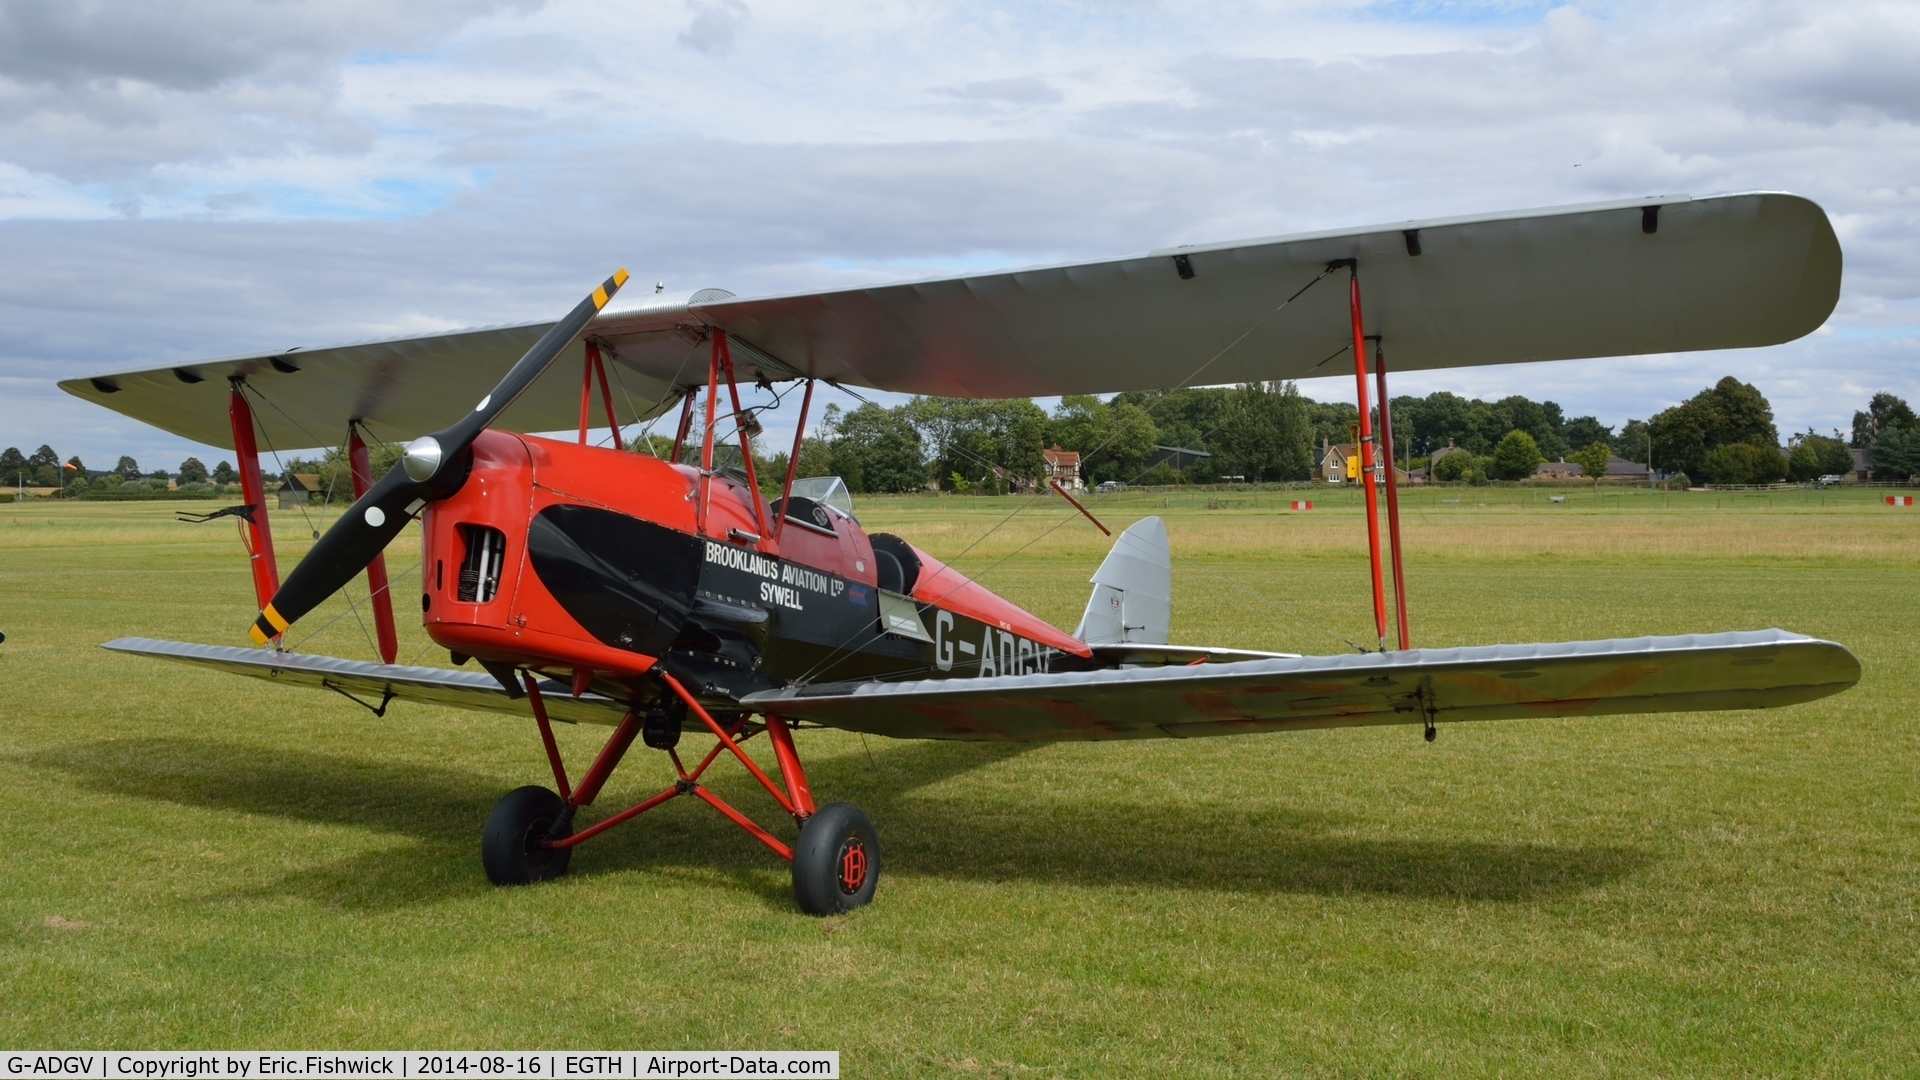 G-ADGV, 1935 De Havilland DH-82A Tiger Moth II C/N 3340, 3. G-ADGV at The Shuttleworth Collection Flying Proms, Aug. 2014.